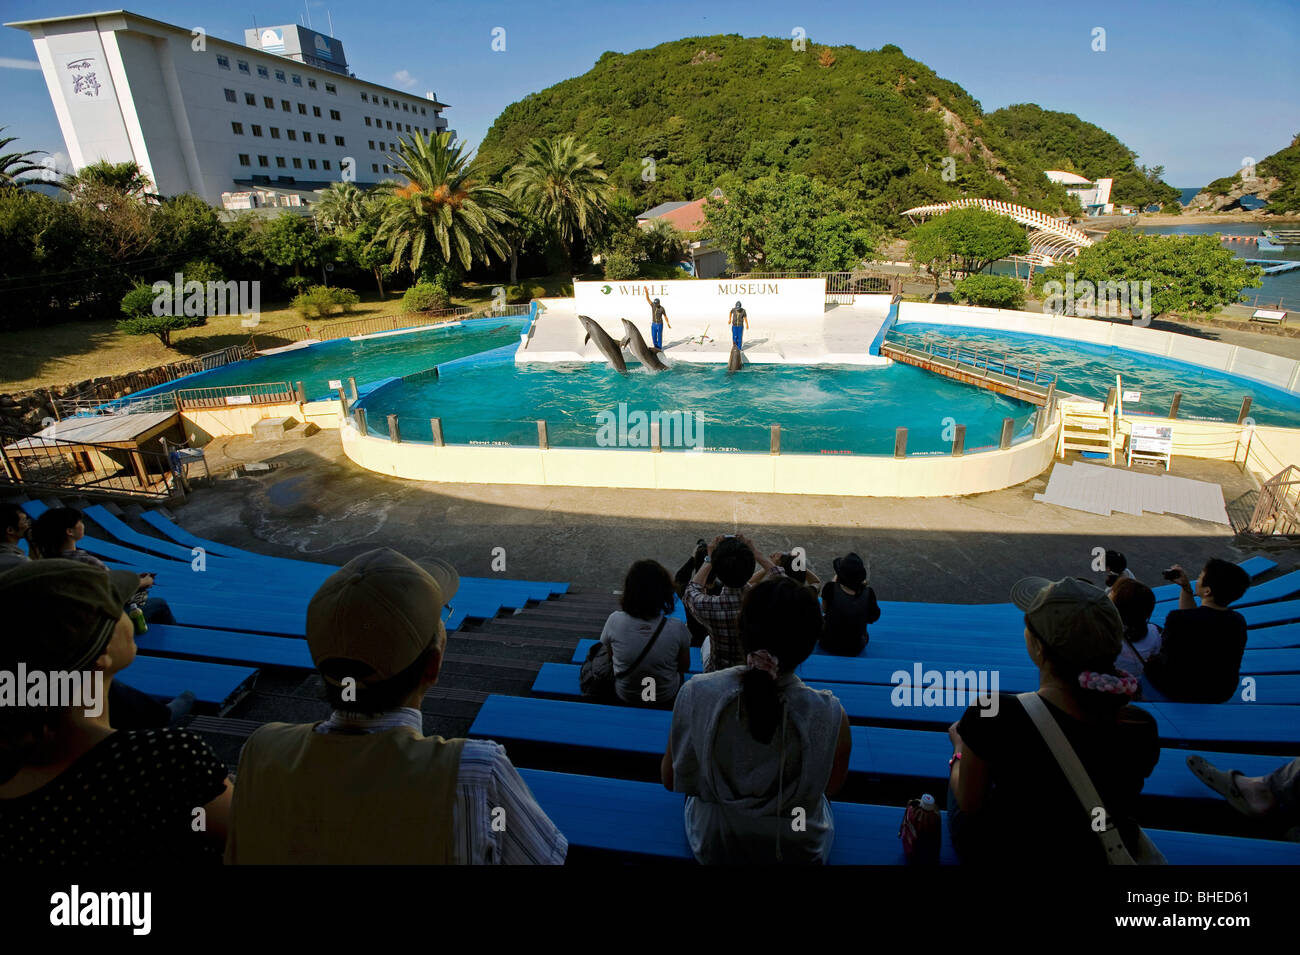 Visitors enjoy a dolphin show at a dolphinarium inside the grounds of the whaling museum in Taiji, Japan Stock Photo